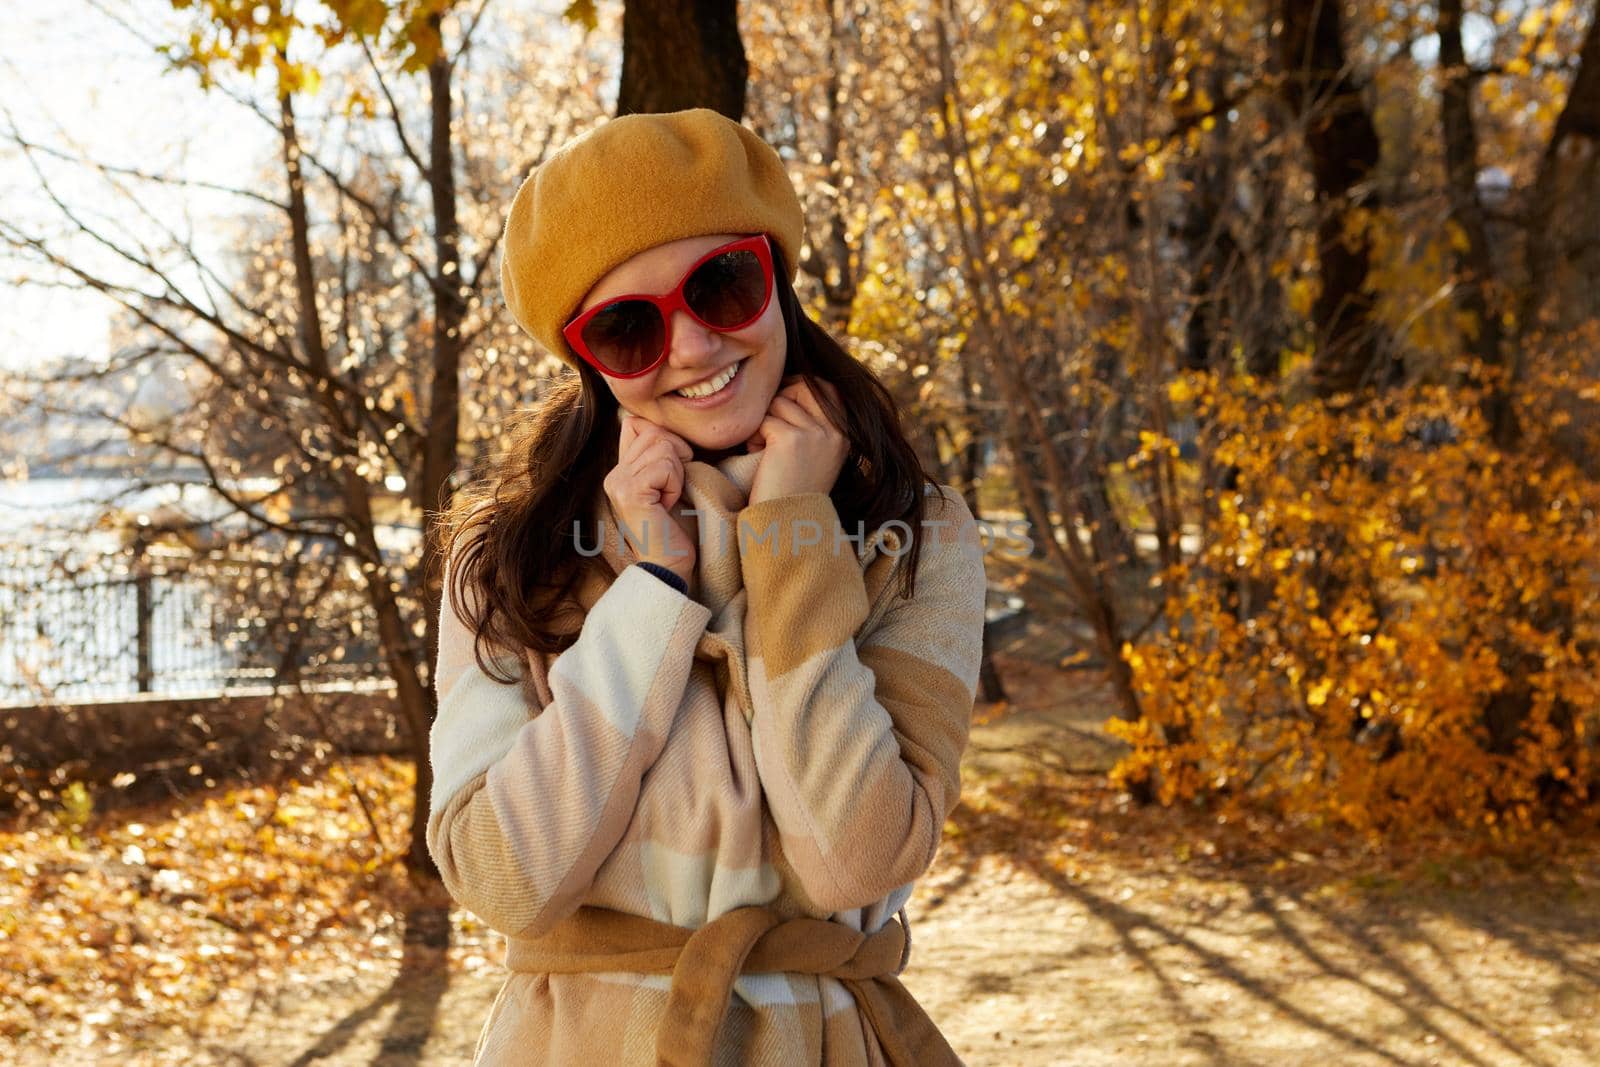 Seasonal autumn fashion. Modern young woman wearing fashionable warm clothes posing in the autumn park